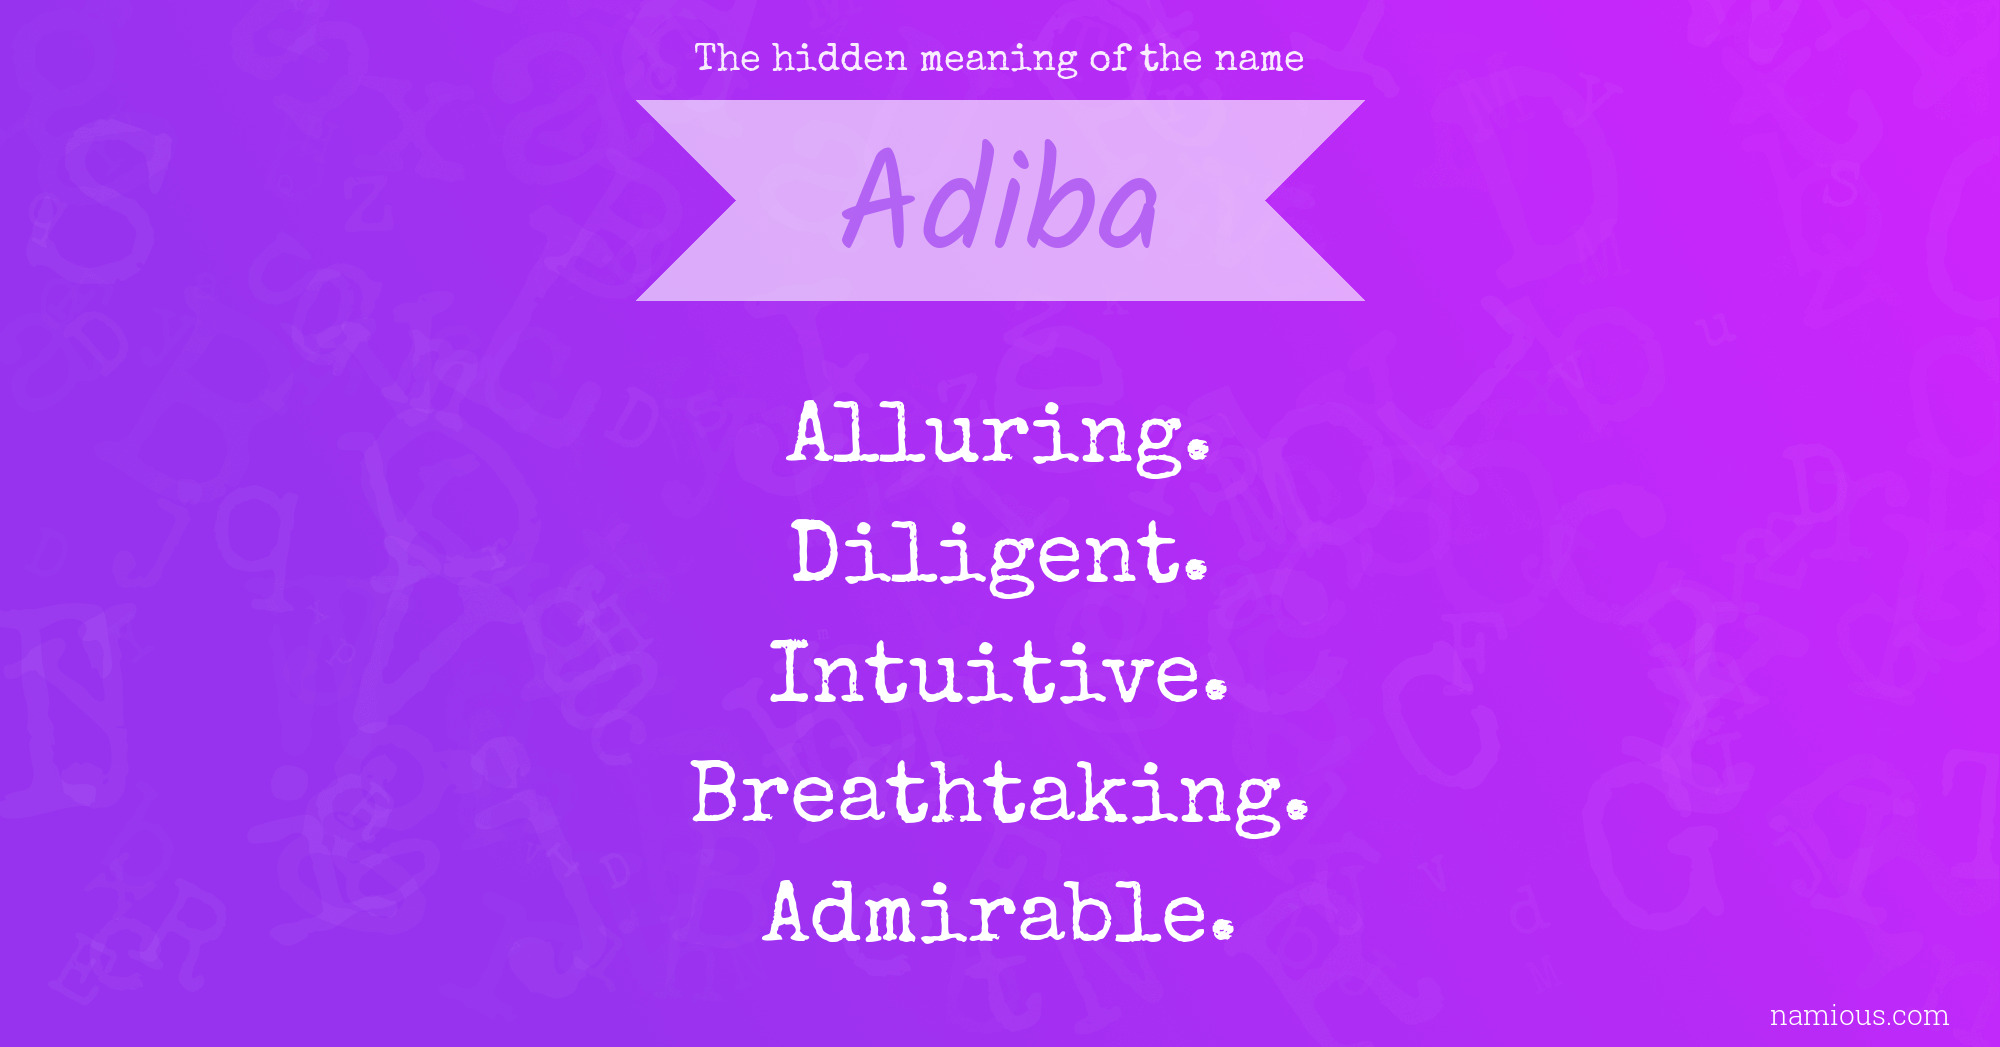 The hidden meaning of the name Adiba